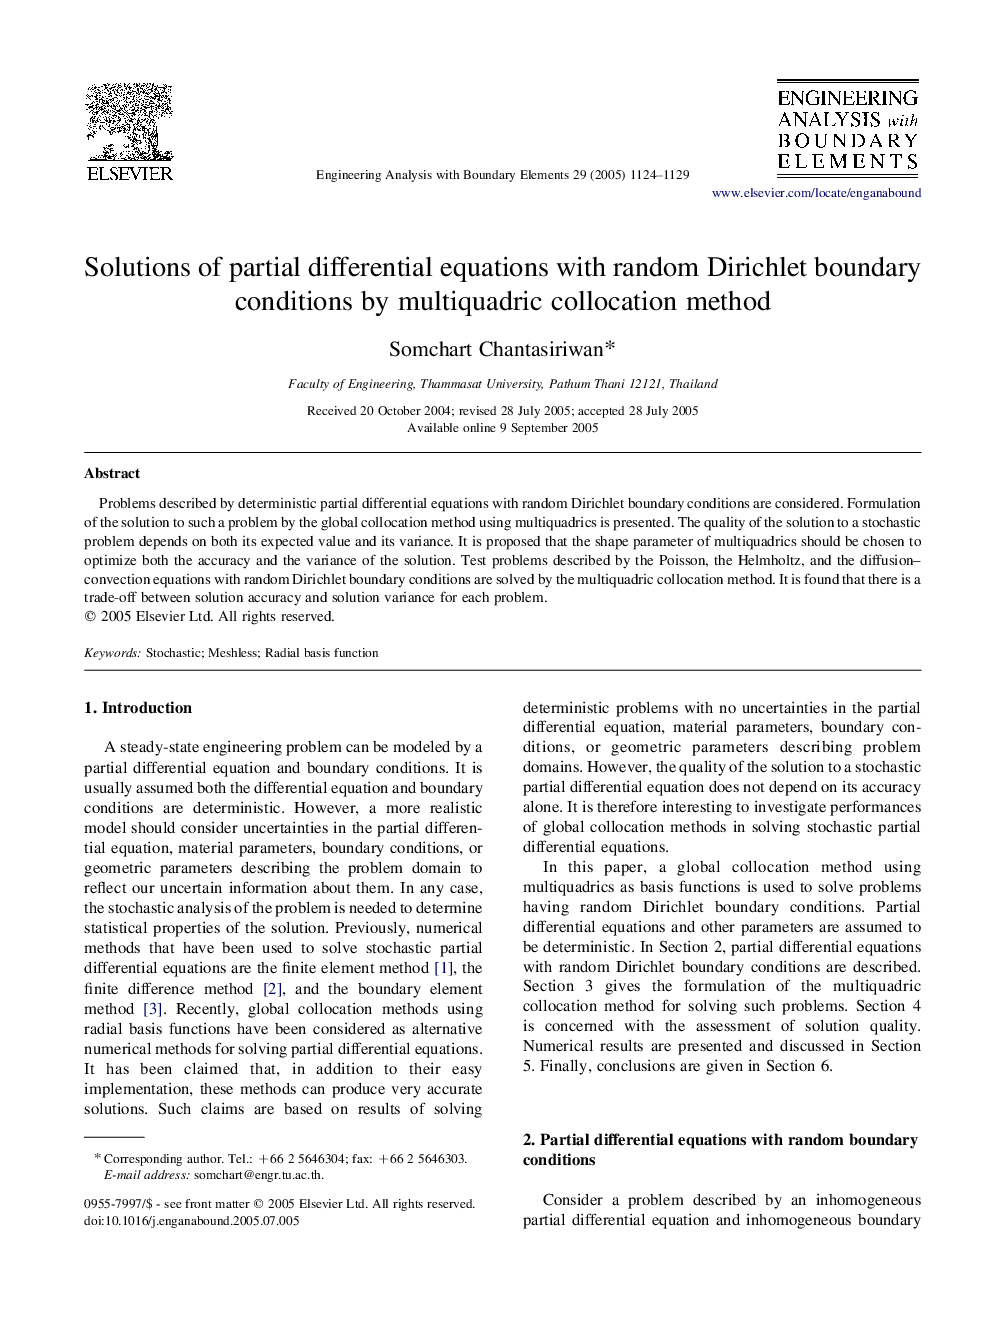 Solutions of partial differential equations with random Dirichlet boundary conditions by multiquadric collocation method